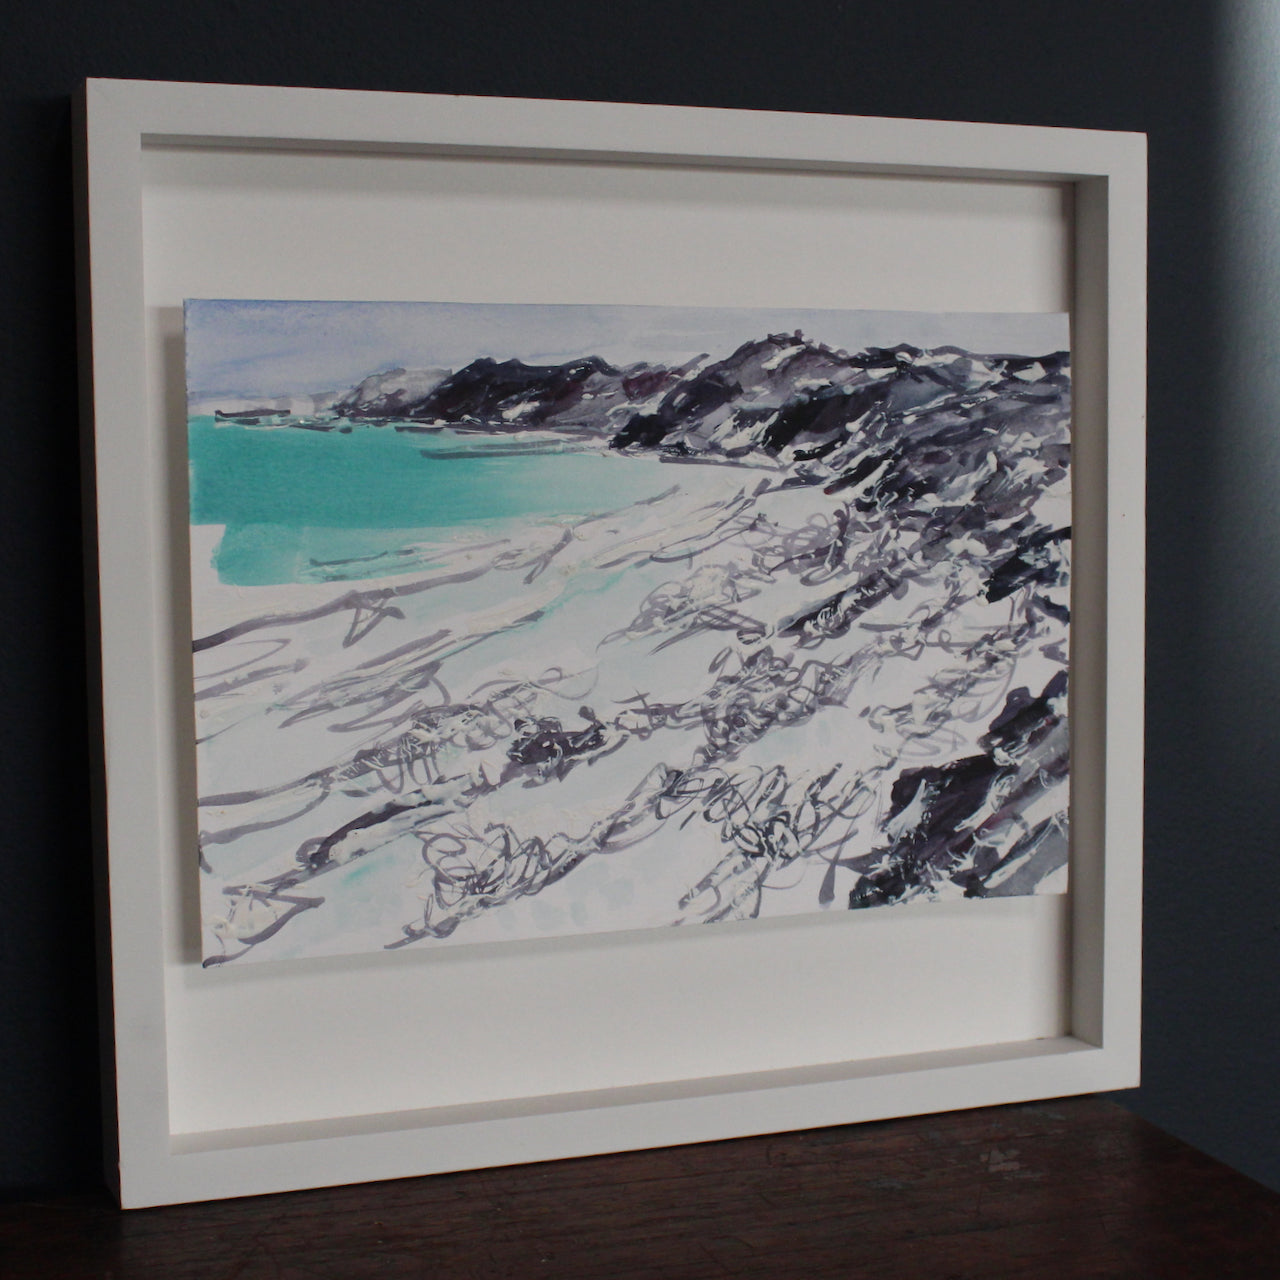 Watercolour painting by Jill Hudson of Tregantle beach in Cornwall with dark cliffs and turquoise sea